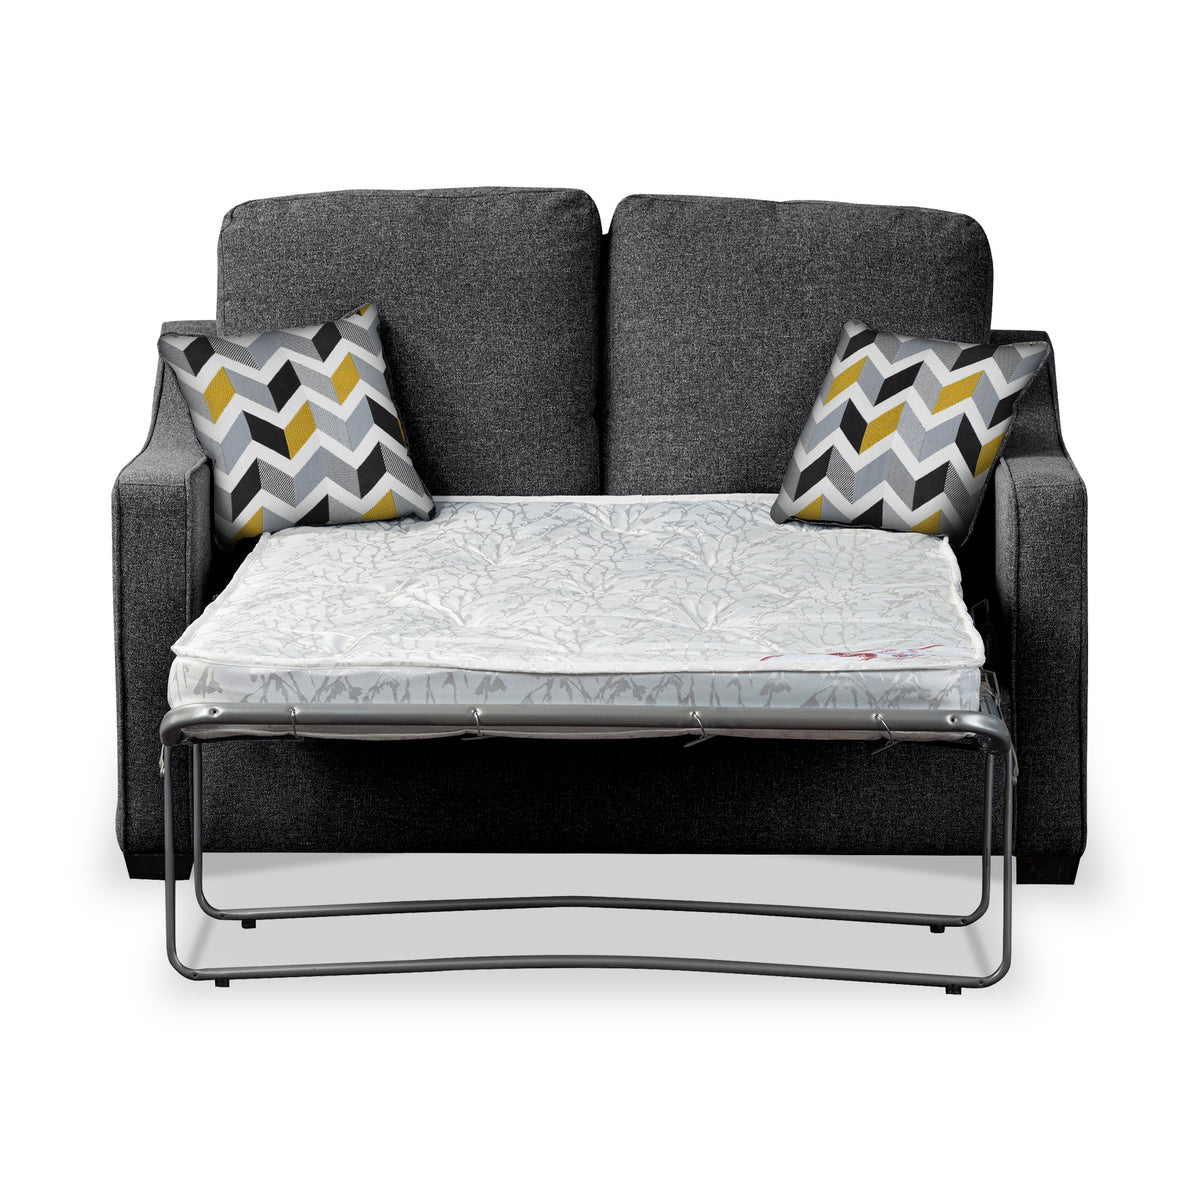 Charlcote Charcoal Faux Linen 2 Seater Sofabed with Mustard Scatter Cushions from Roseland Furniture